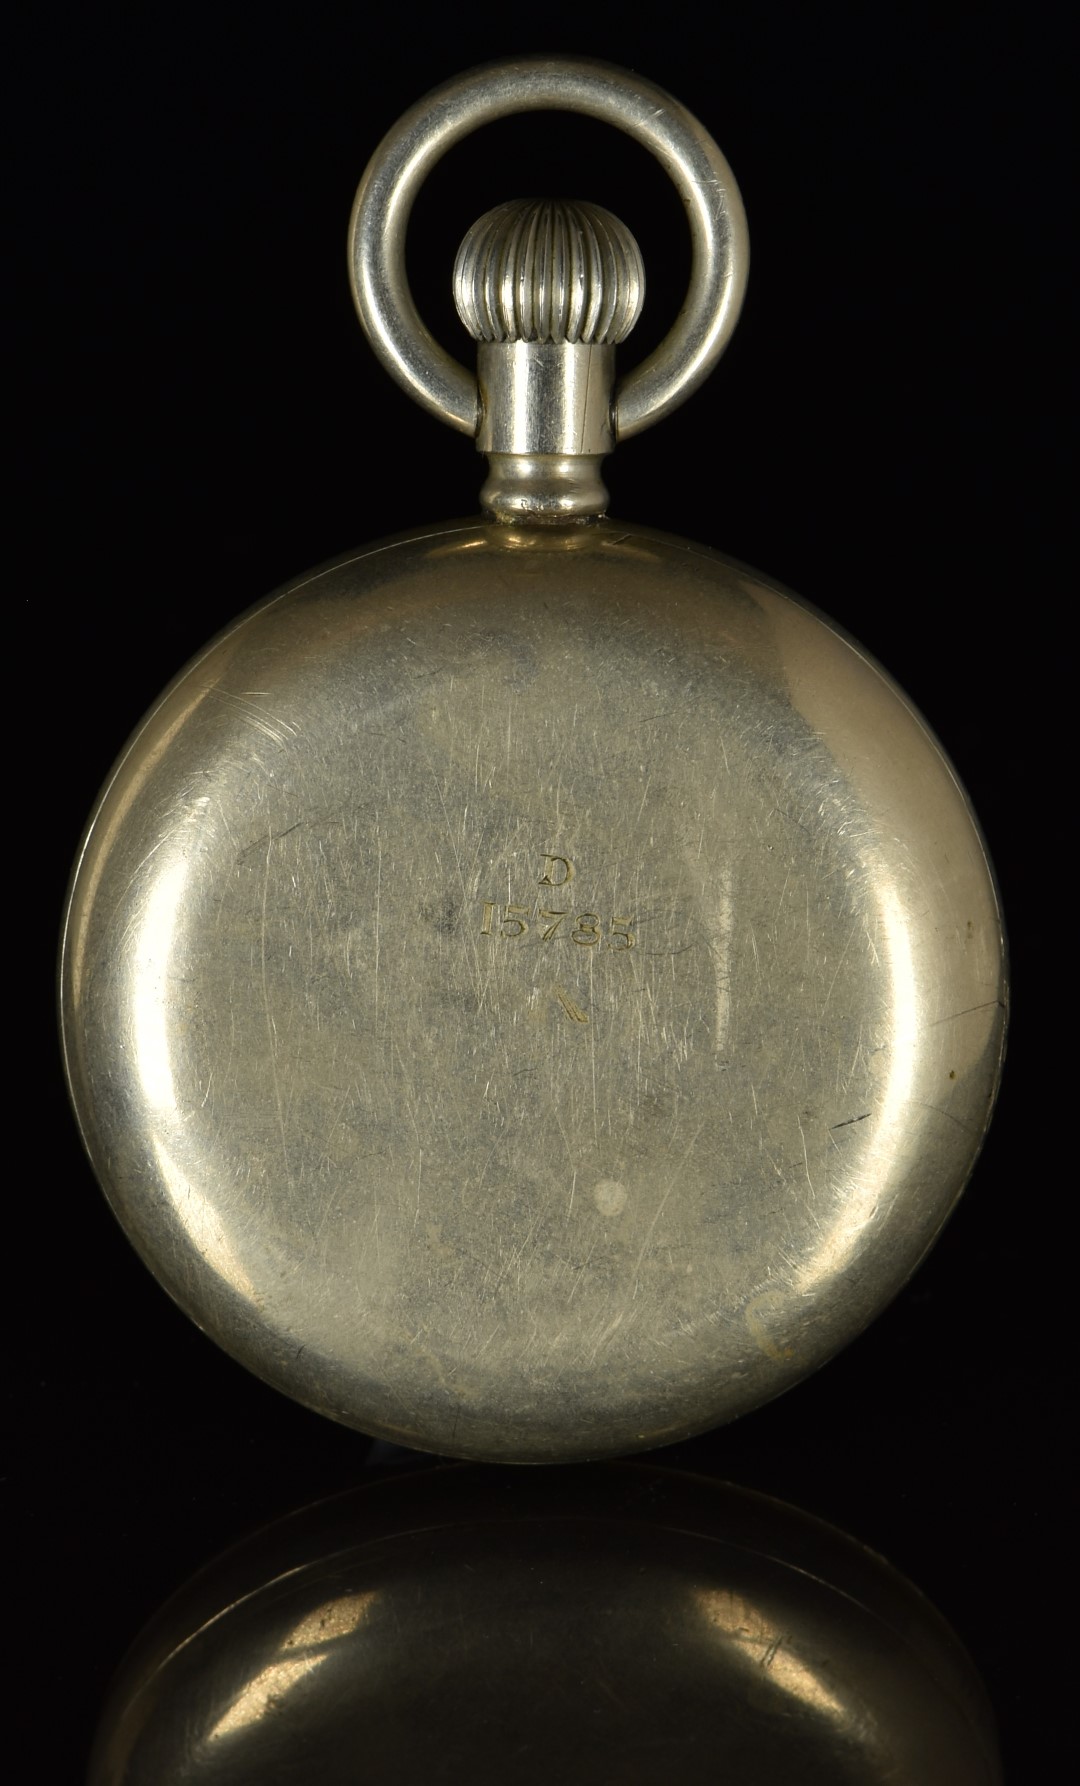 W Eberhard of London keyless winding open faced military pocket watch with subsidiary seconds - Image 2 of 3